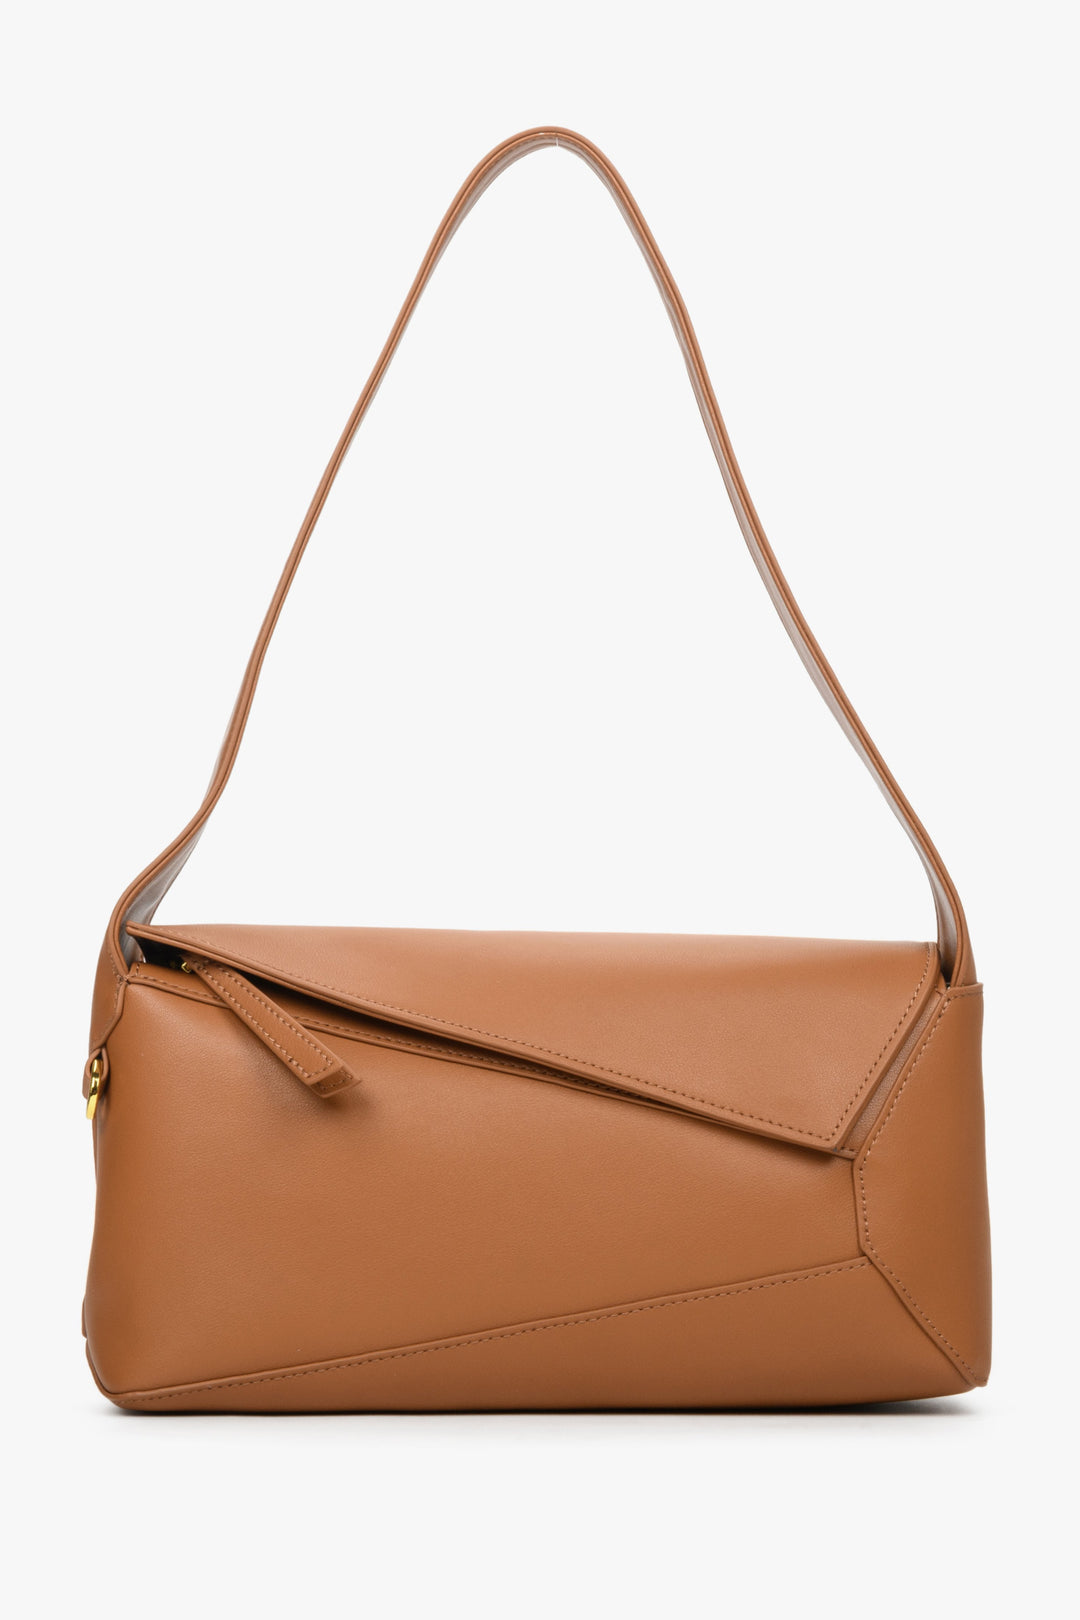 Women's small handbag made of genuine leather in brown by Estro.